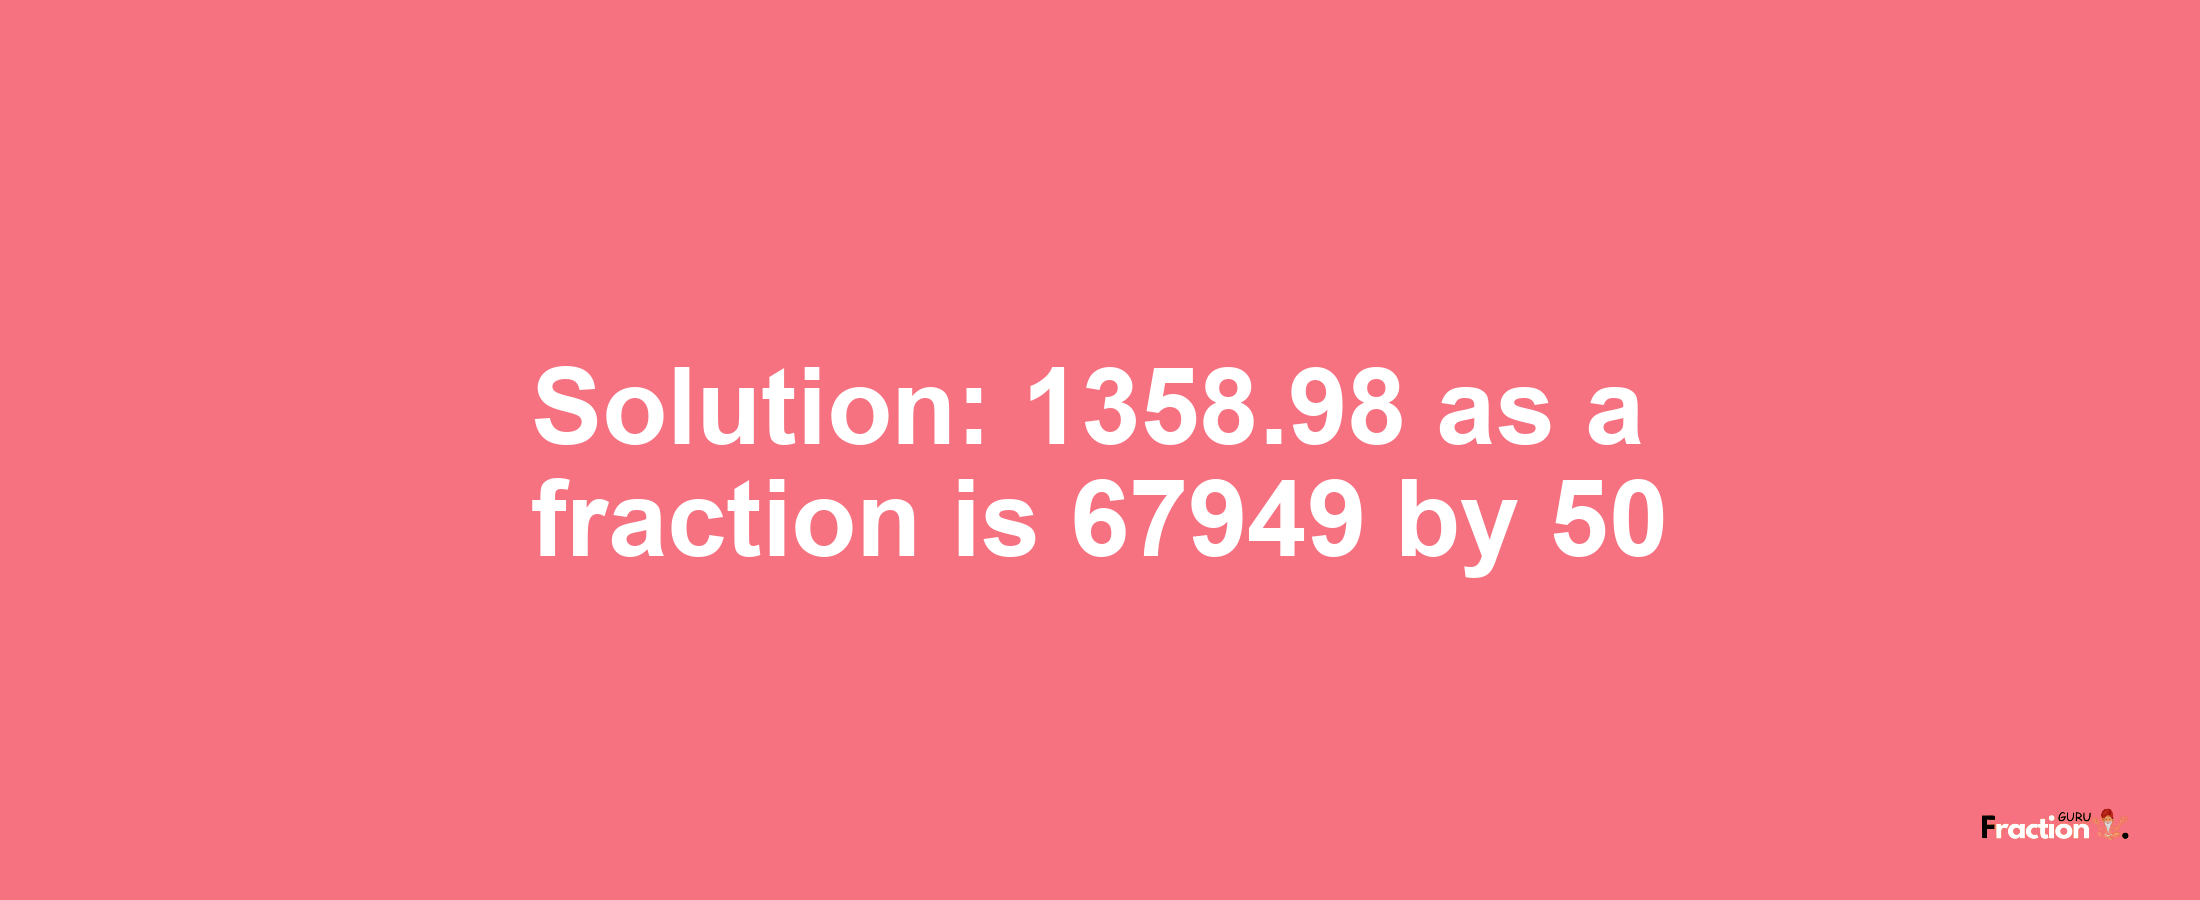 Solution:1358.98 as a fraction is 67949/50